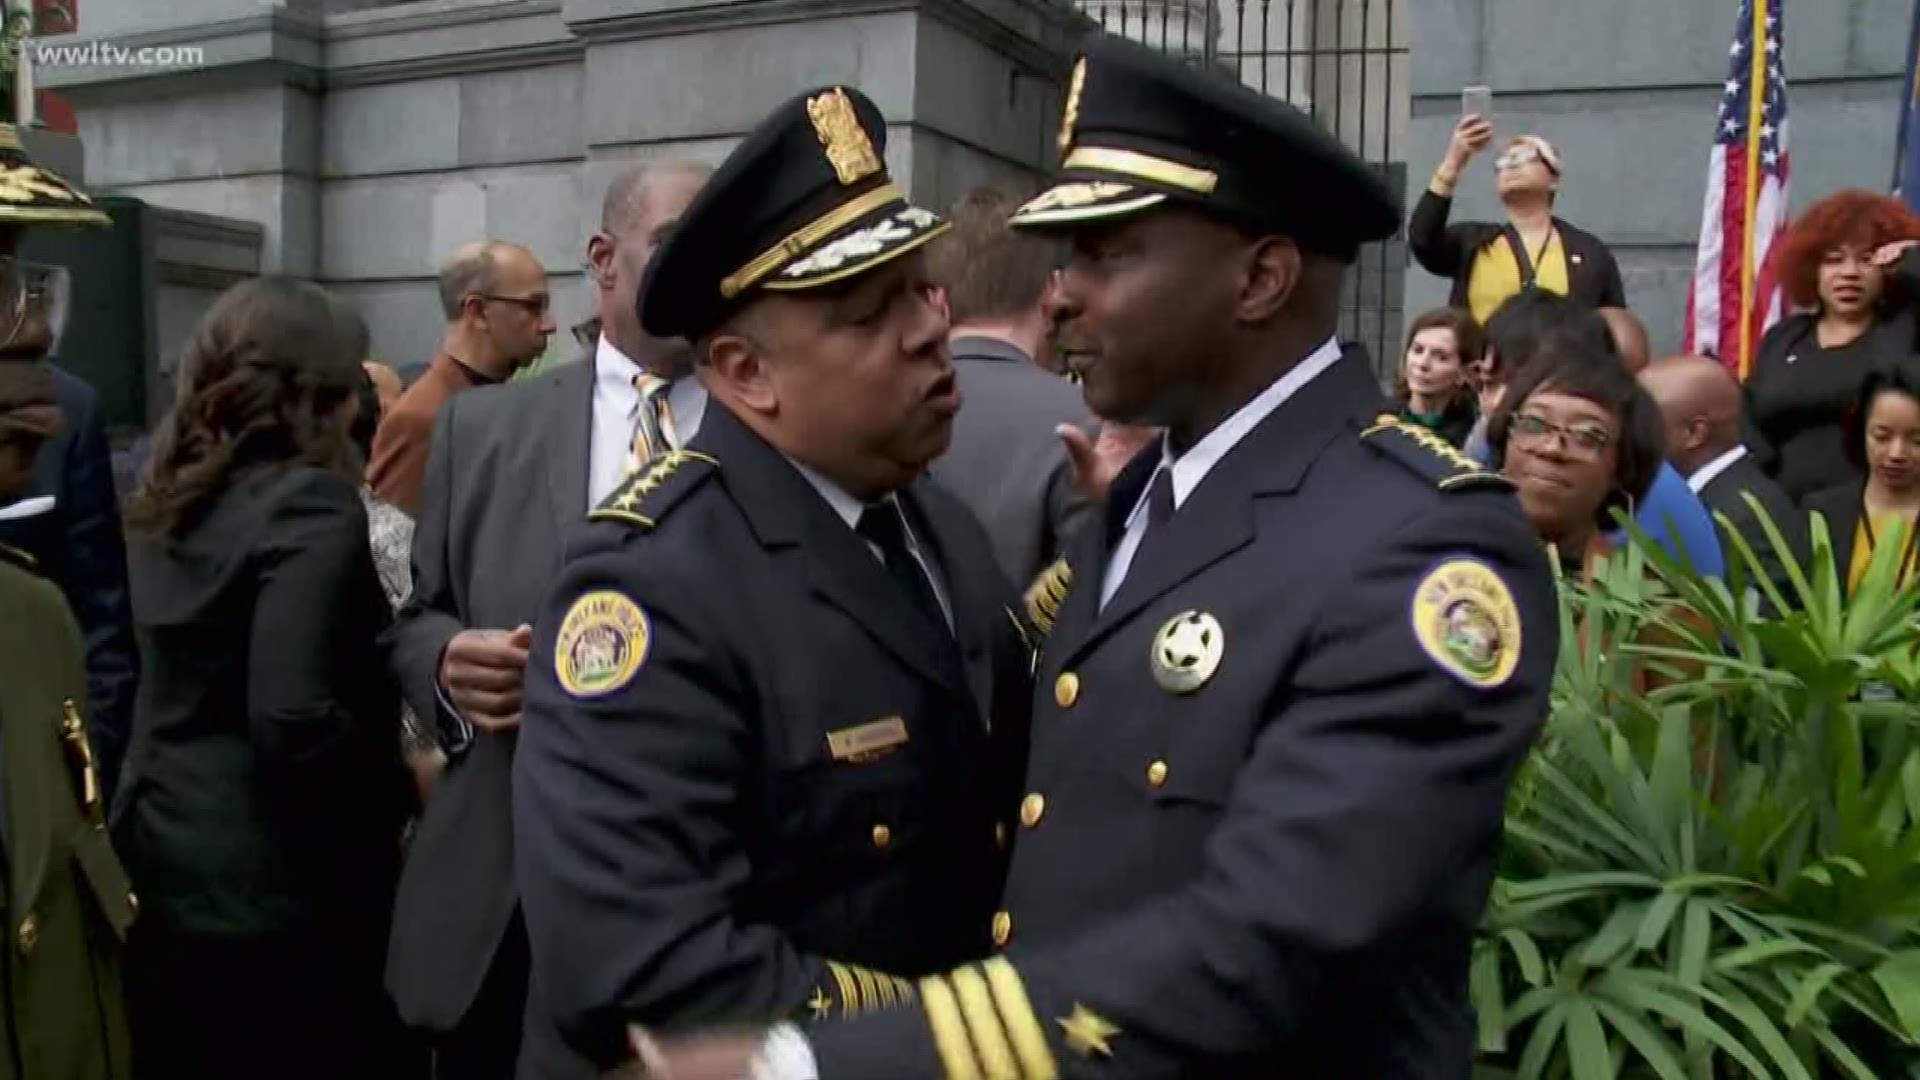 Shaun Ferguson takes the NOPD helm from former Superintendent Michael Harrison, who will move to Baltimore to head that city's police department.